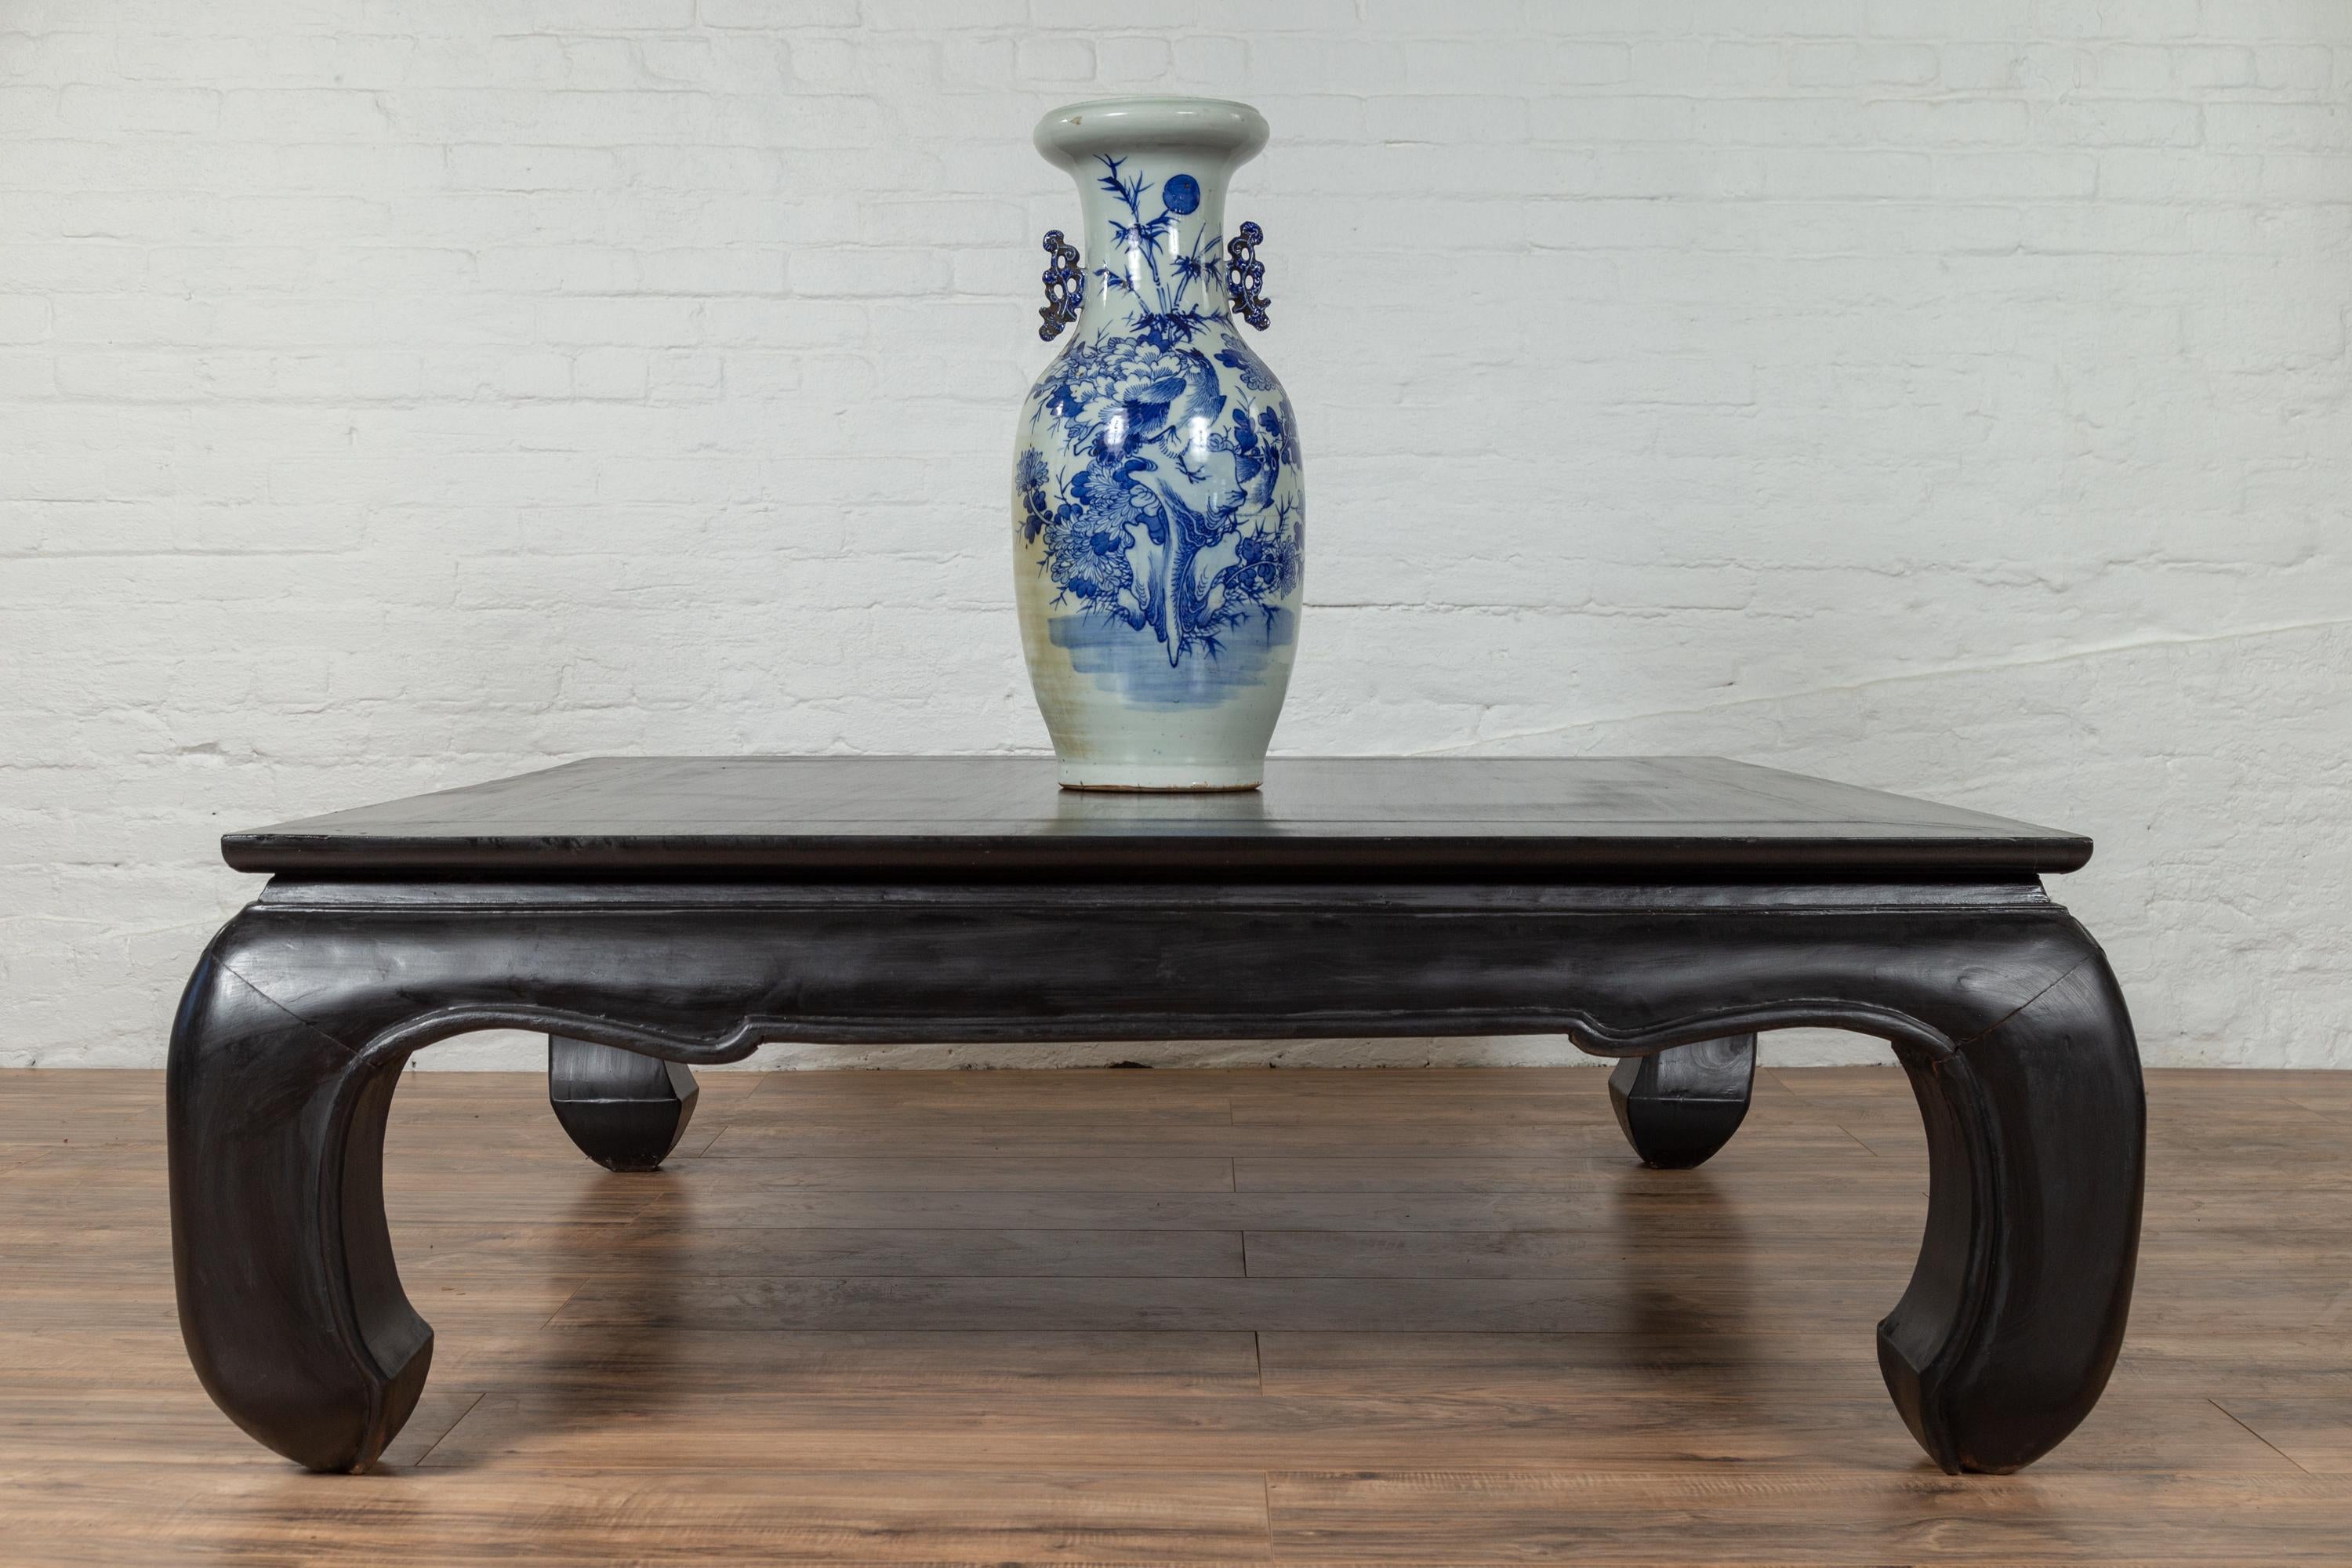 A vintage Thai teak coffee table from the mid-20th century, with large chow legs and black lacquer. Born in Thailand during the midcentury period, this teak coffee table features a square planked waisted top sitting above an ornamental curving